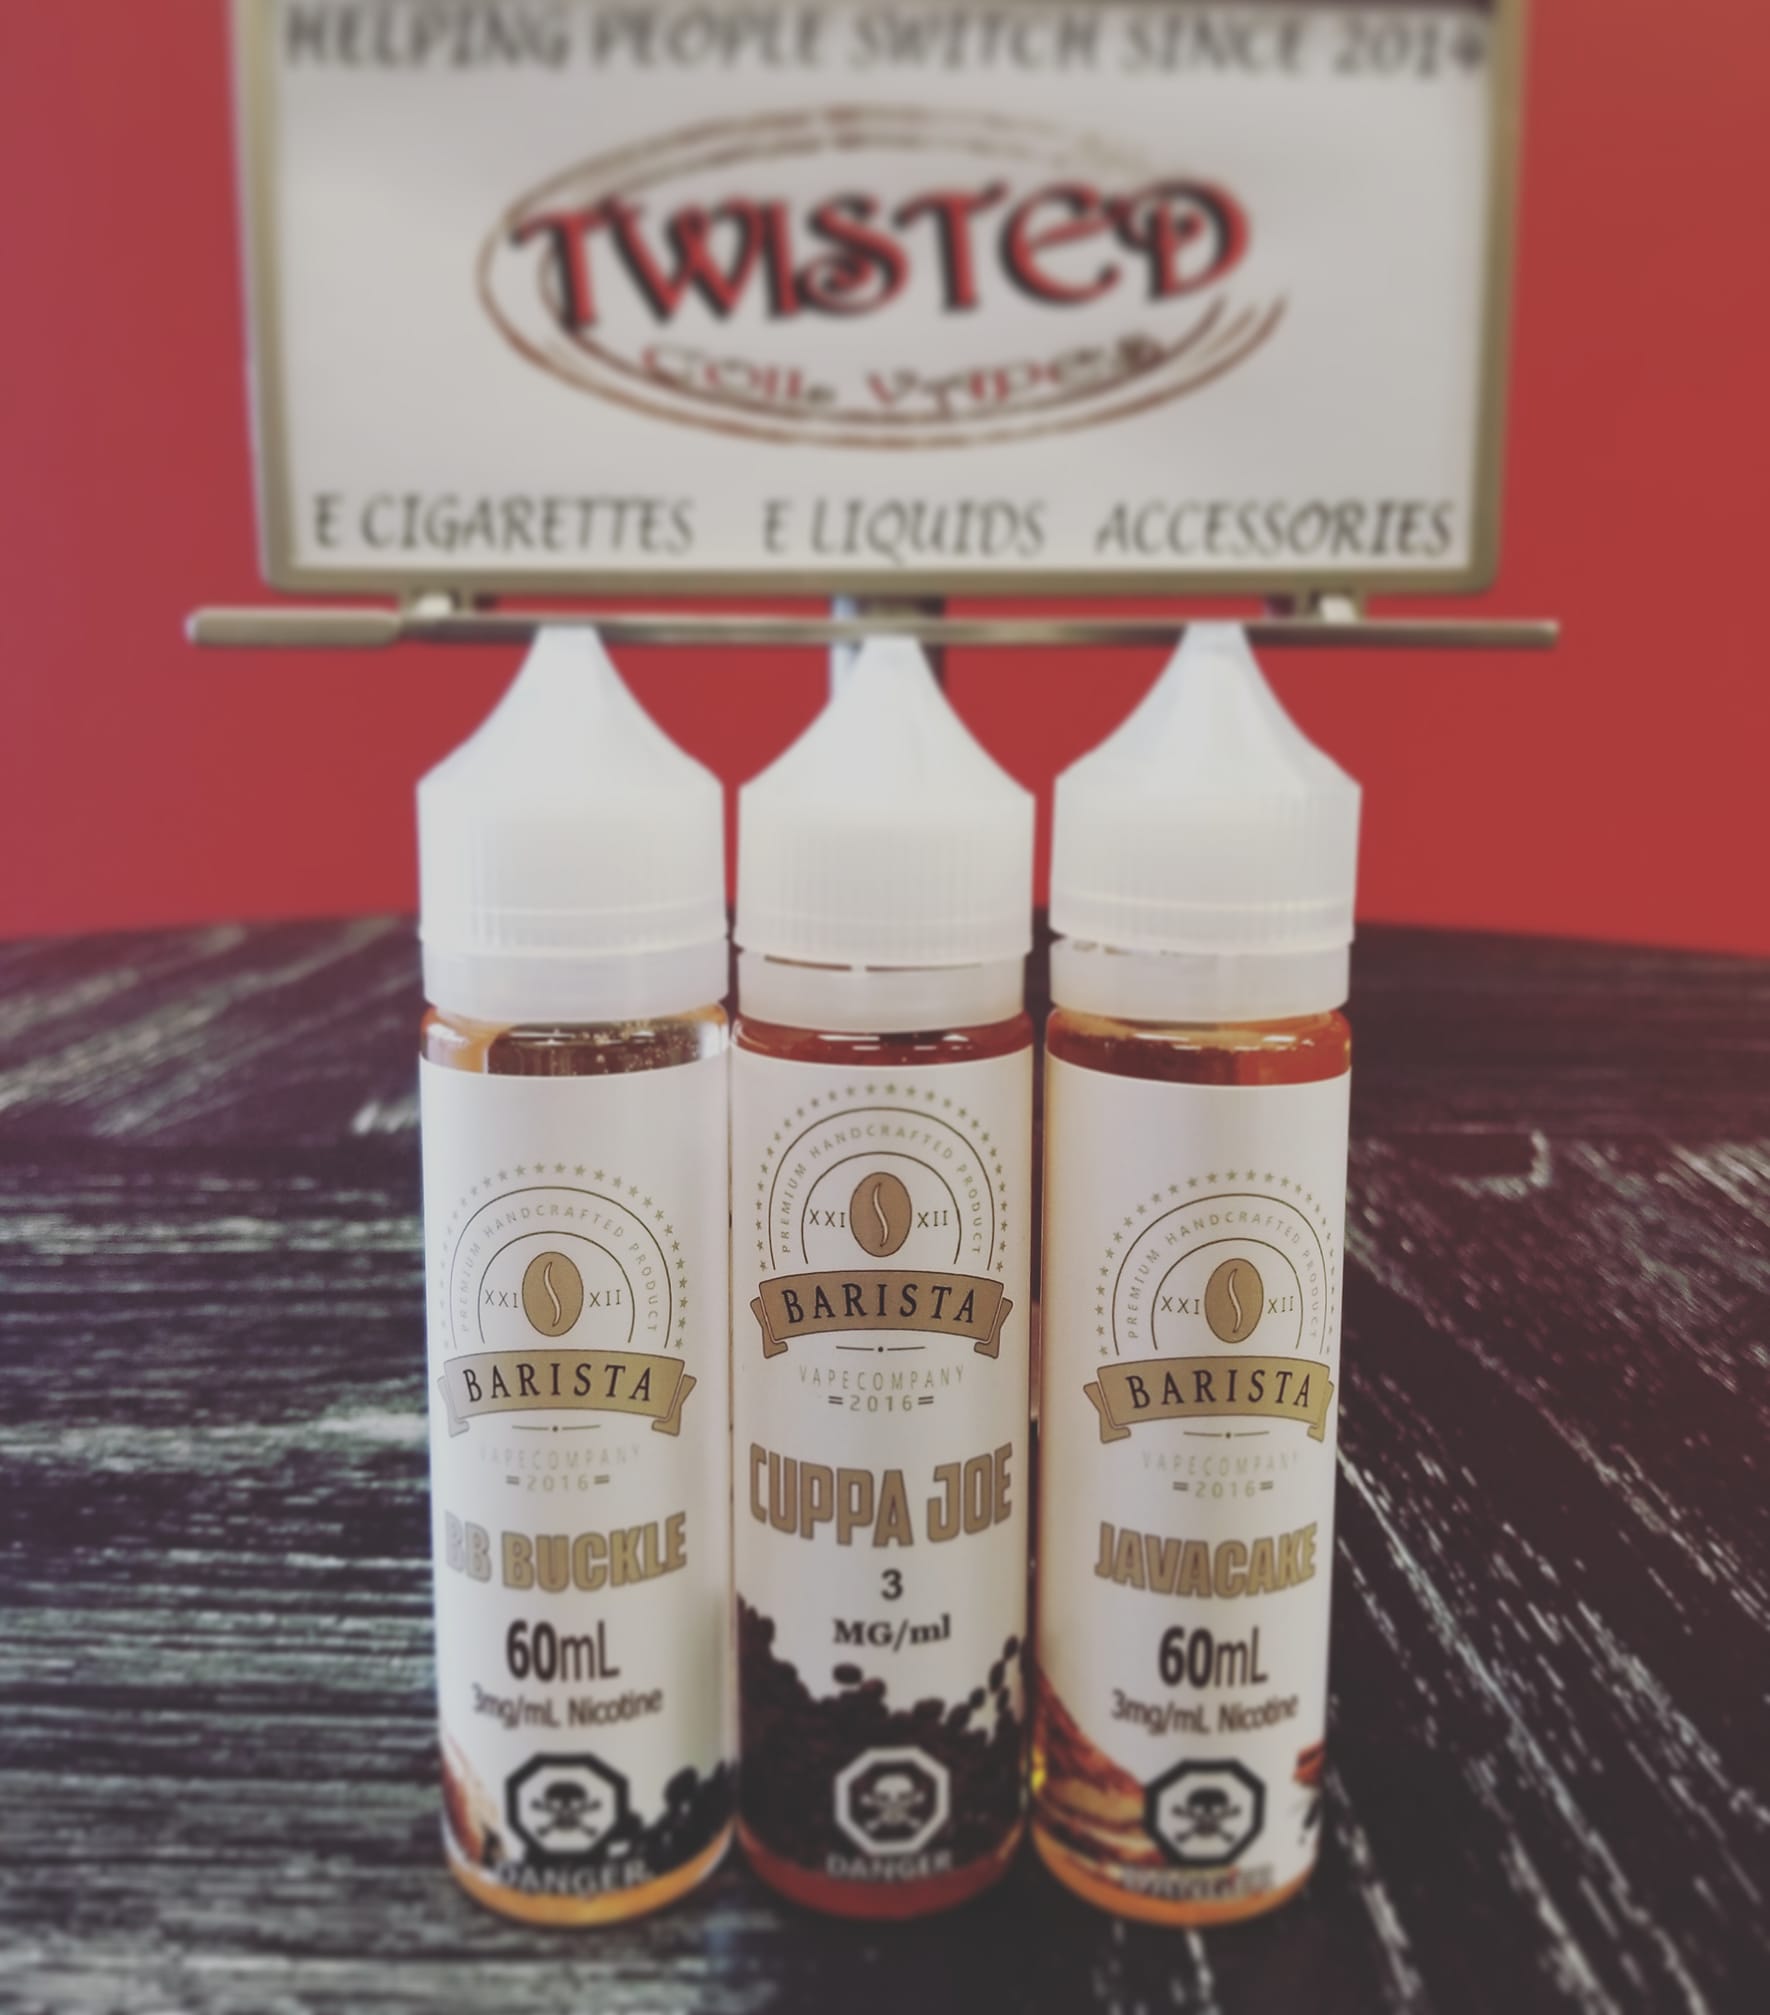 Twisted Coil Vapes Store